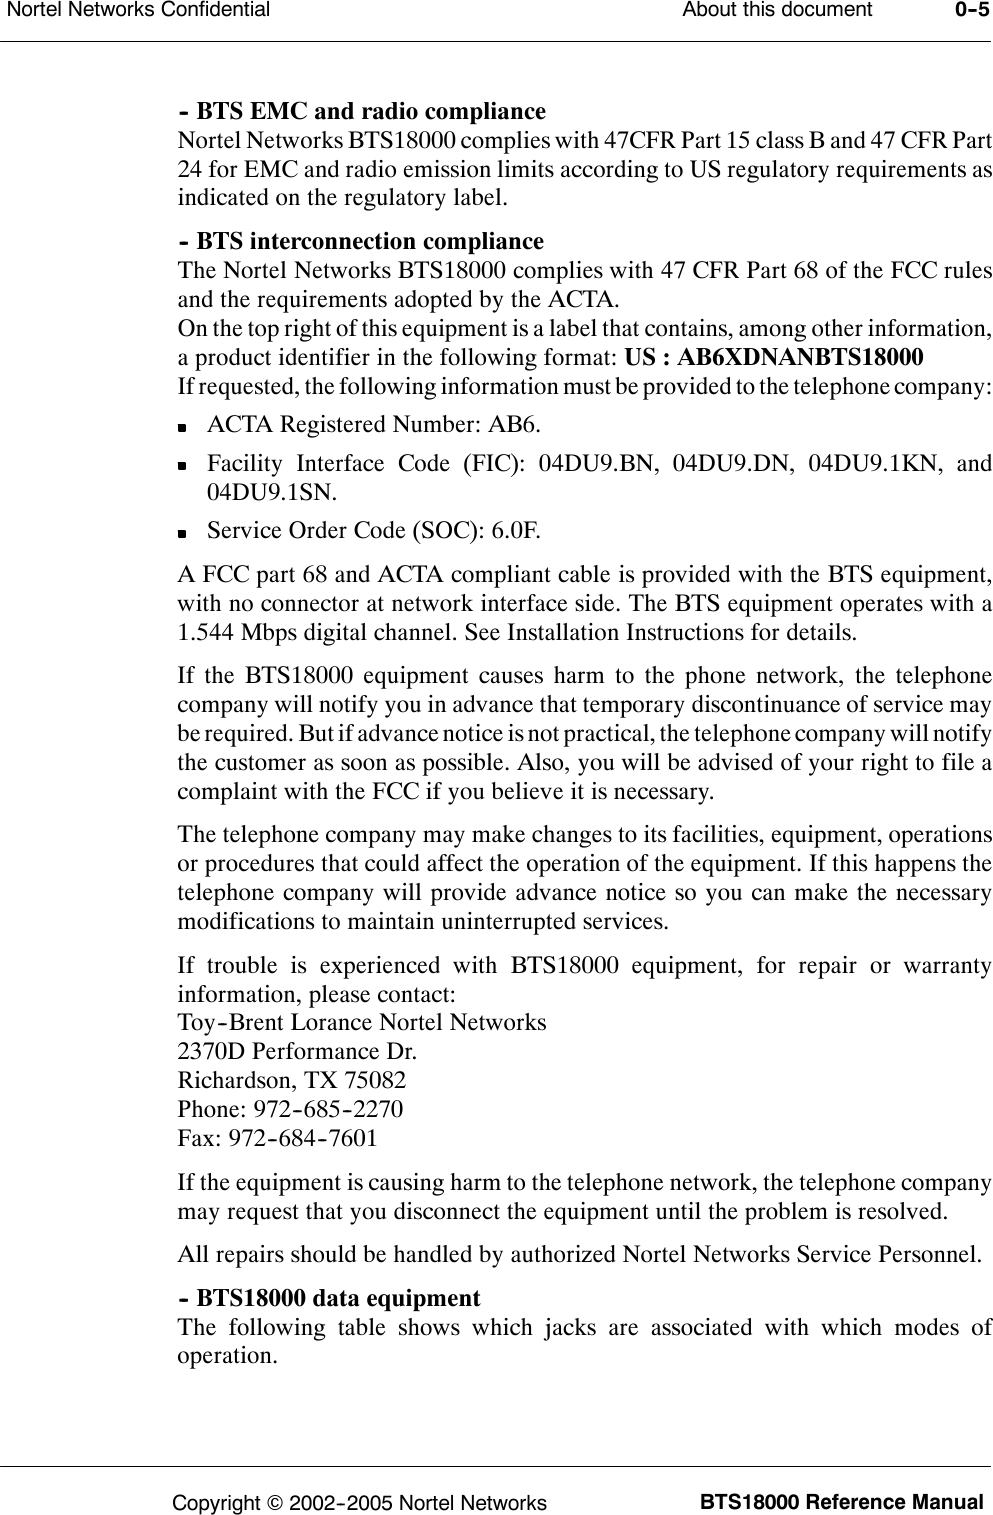 About this documentNortel Networks Confidential 0--5BTS18000 Reference ManualCopyright ©2002--2005 Nortel Networks-- BTS EMC and radio complianceNortel Networks BTS18000 complies with 47CFR Part 15 class B and 47 CFR Part24 for EMC and radio emission limits according to US regulatory requirements asindicated on the regulatory label.-- BTS interconnection complianceThe Nortel Networks BTS18000 complies with 47 CFR Part 68 of the FCC rulesand the requirements adopted by the ACTA.On the top right of this equipment is a label that contains, among other information,a product identifier in the following format: US : AB6XDNANBTS18000If requested, the following information must be provided to the telephone company:ACTA Registered Number: AB6.Facility Interface Code (FIC): 04DU9.BN, 04DU9.DN, 04DU9.1KN, and04DU9.1SN.Service Order Code (SOC): 6.0F.A FCC part 68 and ACTA compliant cable is provided with the BTS equipment,with no connector at network interface side. The BTS equipment operates with a1.544 Mbps digital channel. See Installation Instructions for details.If the BTS18000 equipment causes harm to the phone network, the telephonecompany will notify you in advance that temporary discontinuance of service maybe required. But if advance notice isnot practical, the telephone company will notifythe customer as soon as possible. Also, you will be advised of your right to file acomplaint with the FCC if you believe it is necessary.The telephone company may make changes to its facilities, equipment, operationsor procedures that could affect the operation of the equipment. If this happens thetelephone company will provide advance notice so you can make the necessarymodifications to maintain uninterrupted services.If trouble is experienced with BTS18000 equipment, for repair or warrantyinformation, please contact:Toy--Brent Lorance Nortel Networks2370D Performance Dr.Richardson, TX 75082Phone: 972--685--2270Fax: 972--684--7601If the equipment is causing harm to the telephone network, the telephone companymay request that you disconnect the equipment until the problem is resolved.All repairs should be handled by authorized Nortel Networks Service Personnel.-- BTS18000 data equipmentThe following table shows which jacks are associated with which modes ofoperation.